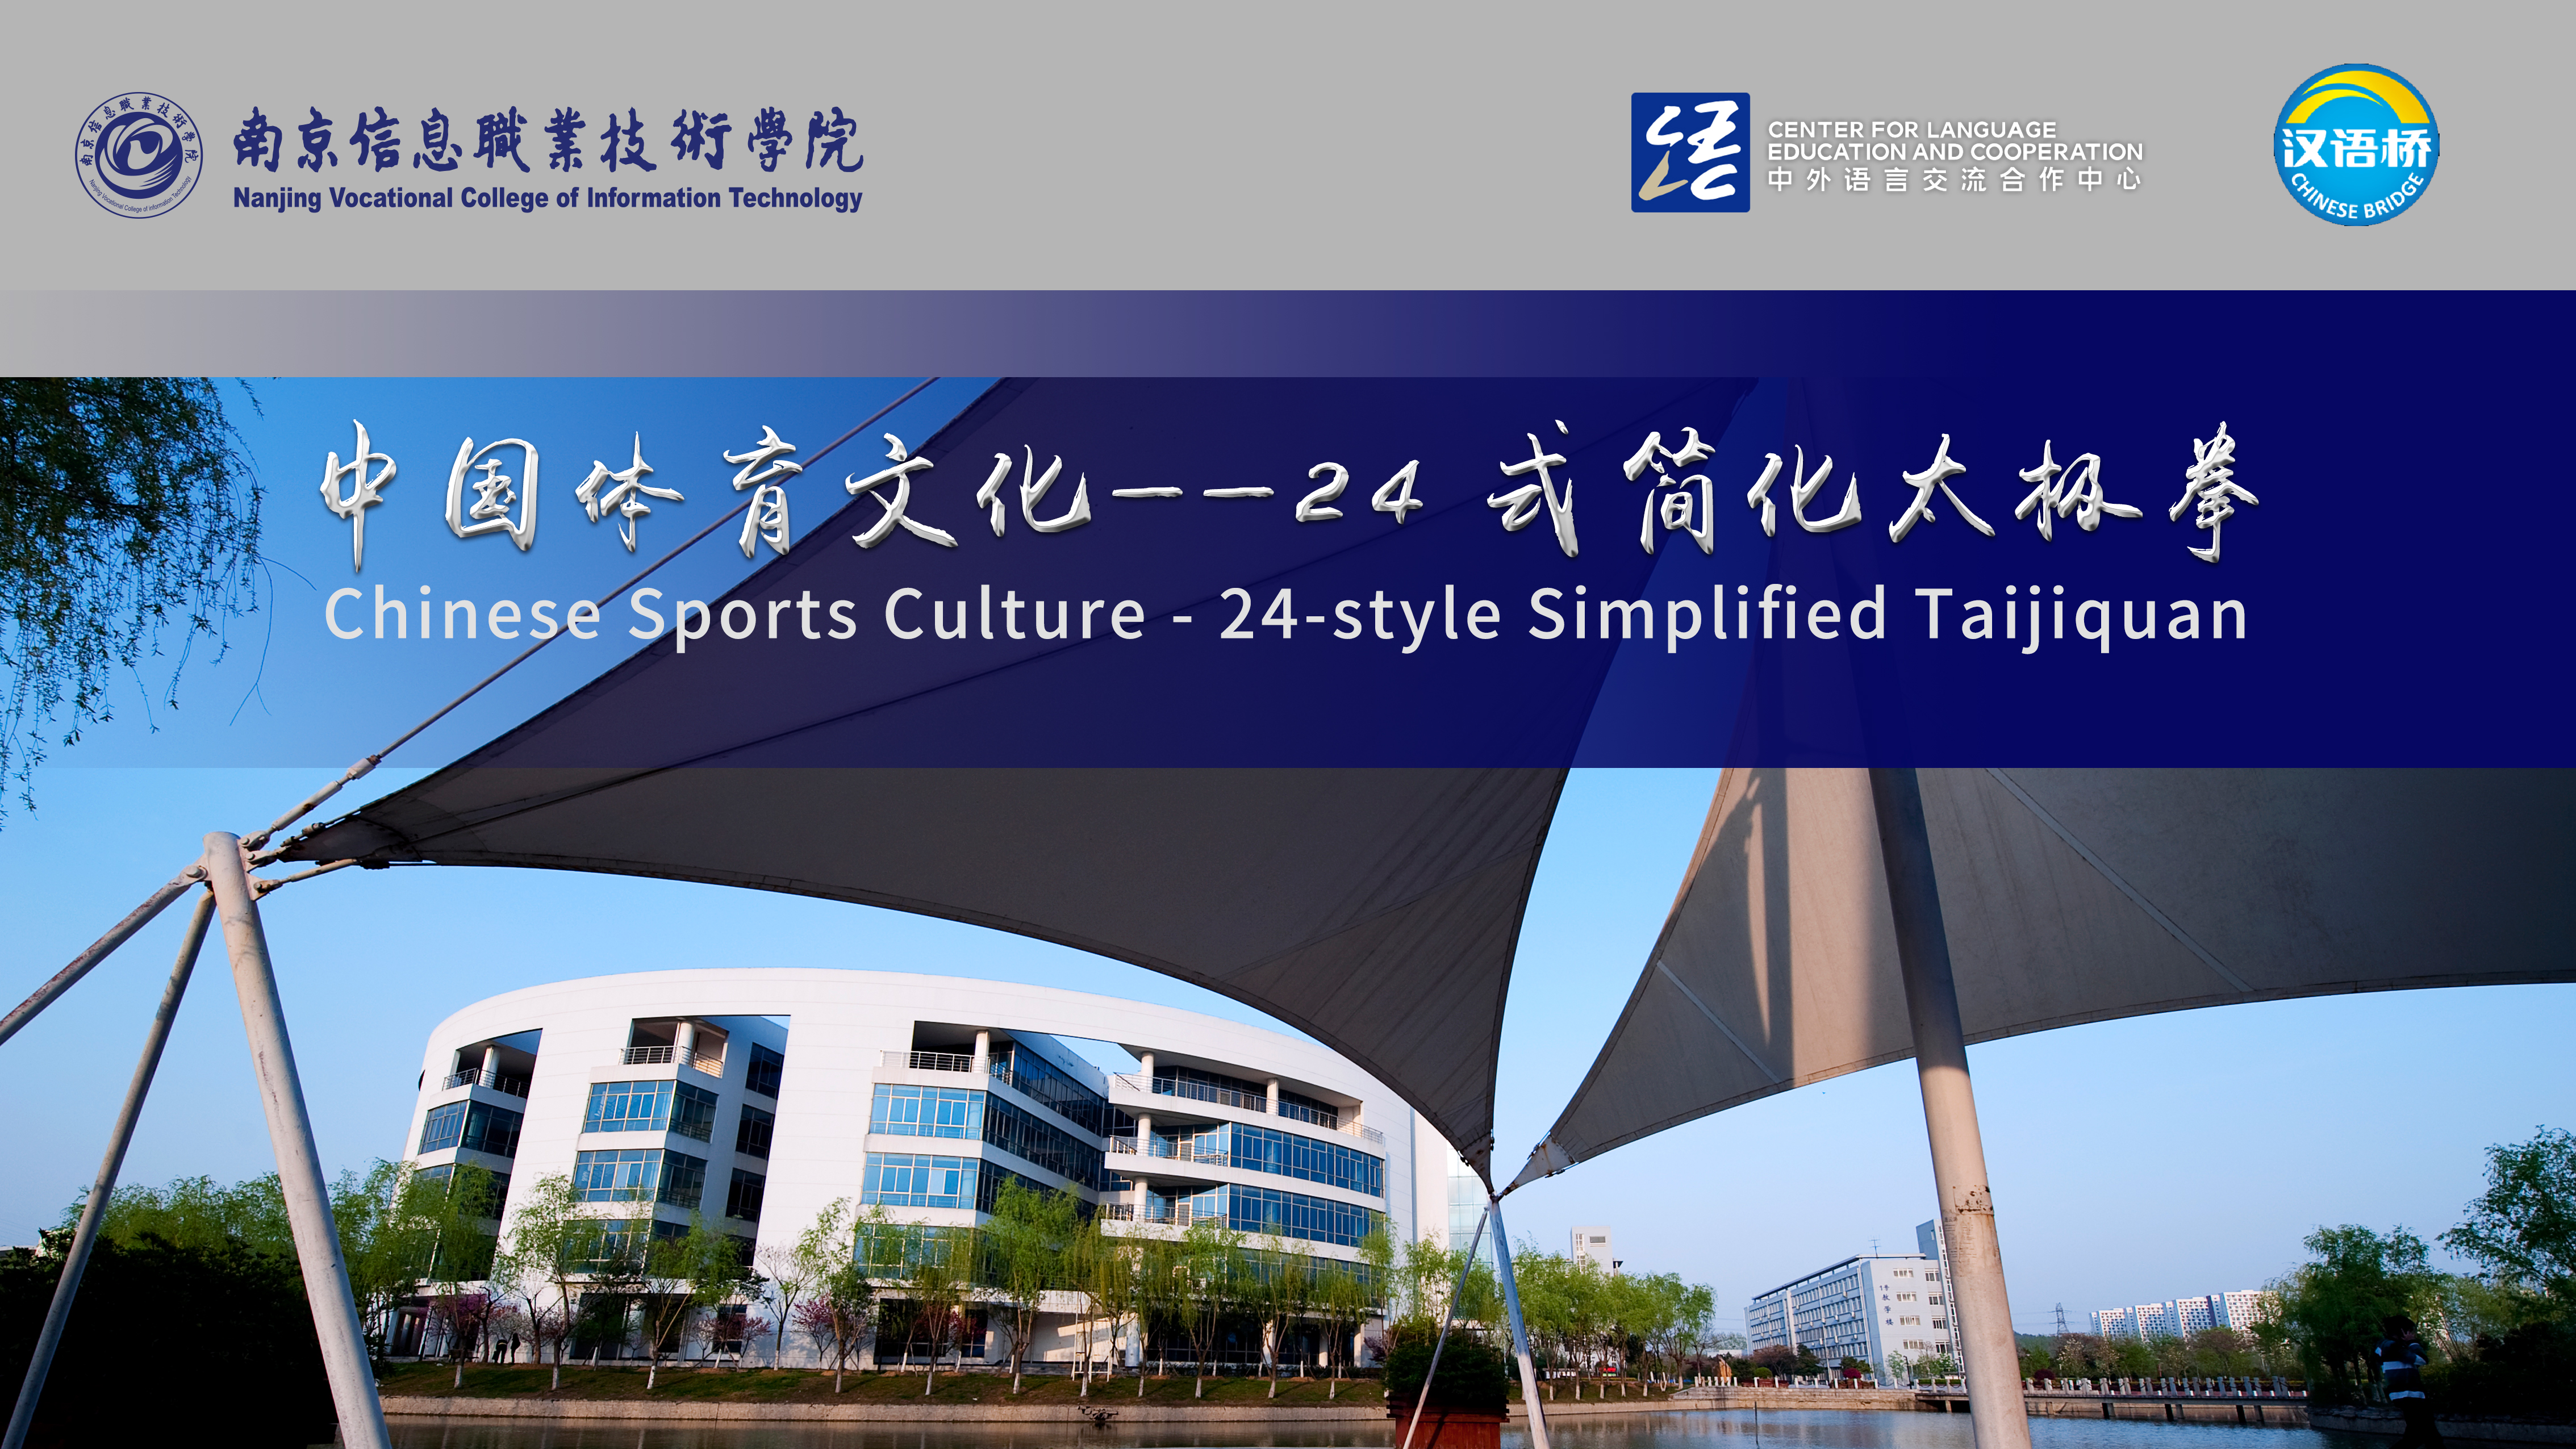 Chinese Sports Culture - 24-style Simplified Taijiquan